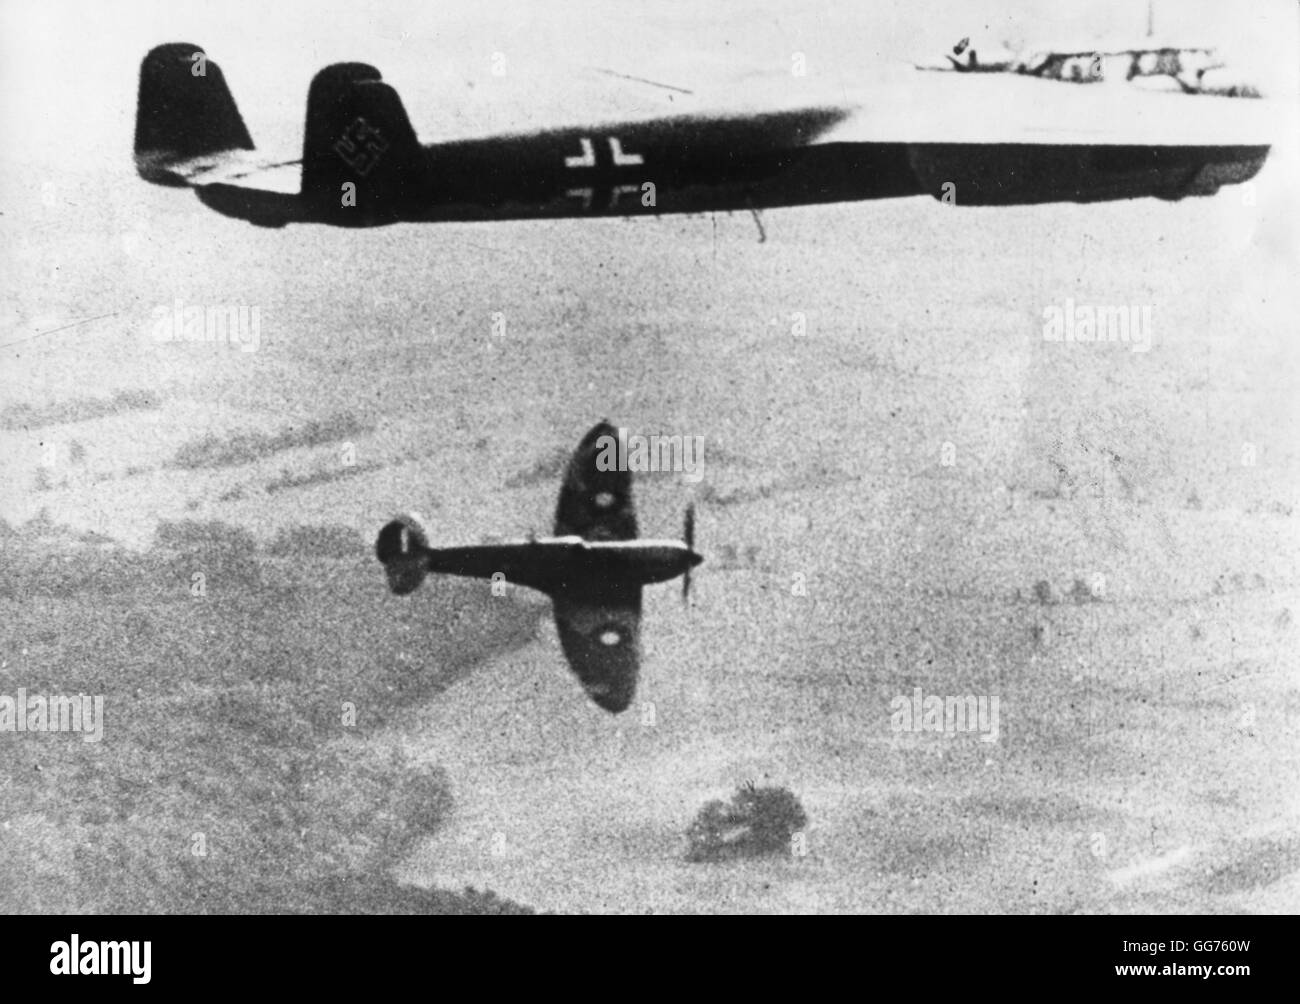 A German airplane, Dornier 'Do-17' type, flies on, while the British Spitfire is forced down after an unsuccessful attack. Stock Photo